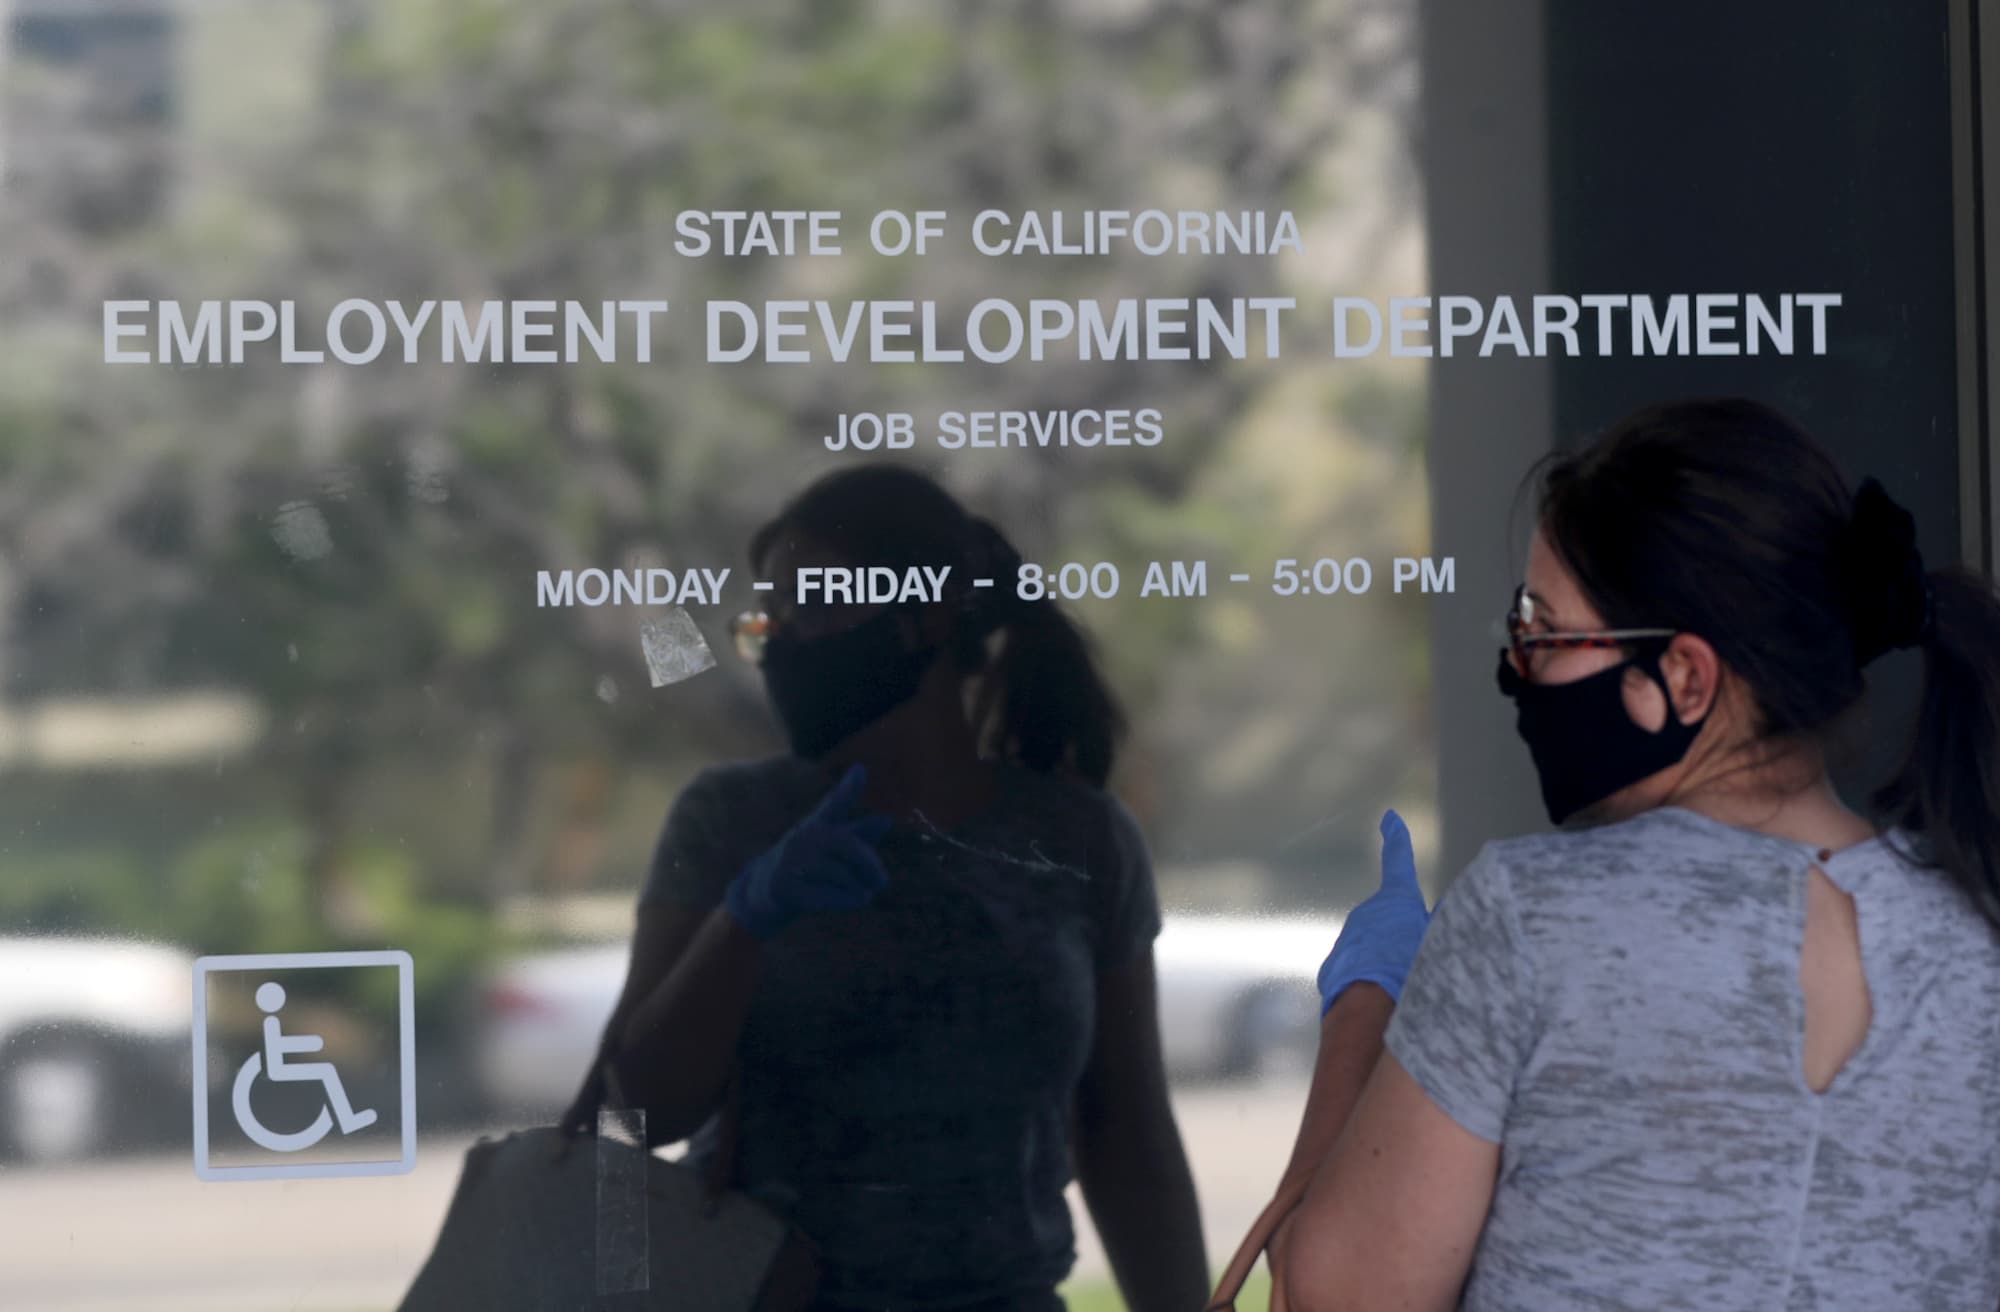 $ 300 unemployment increase spent in California, New York, other states